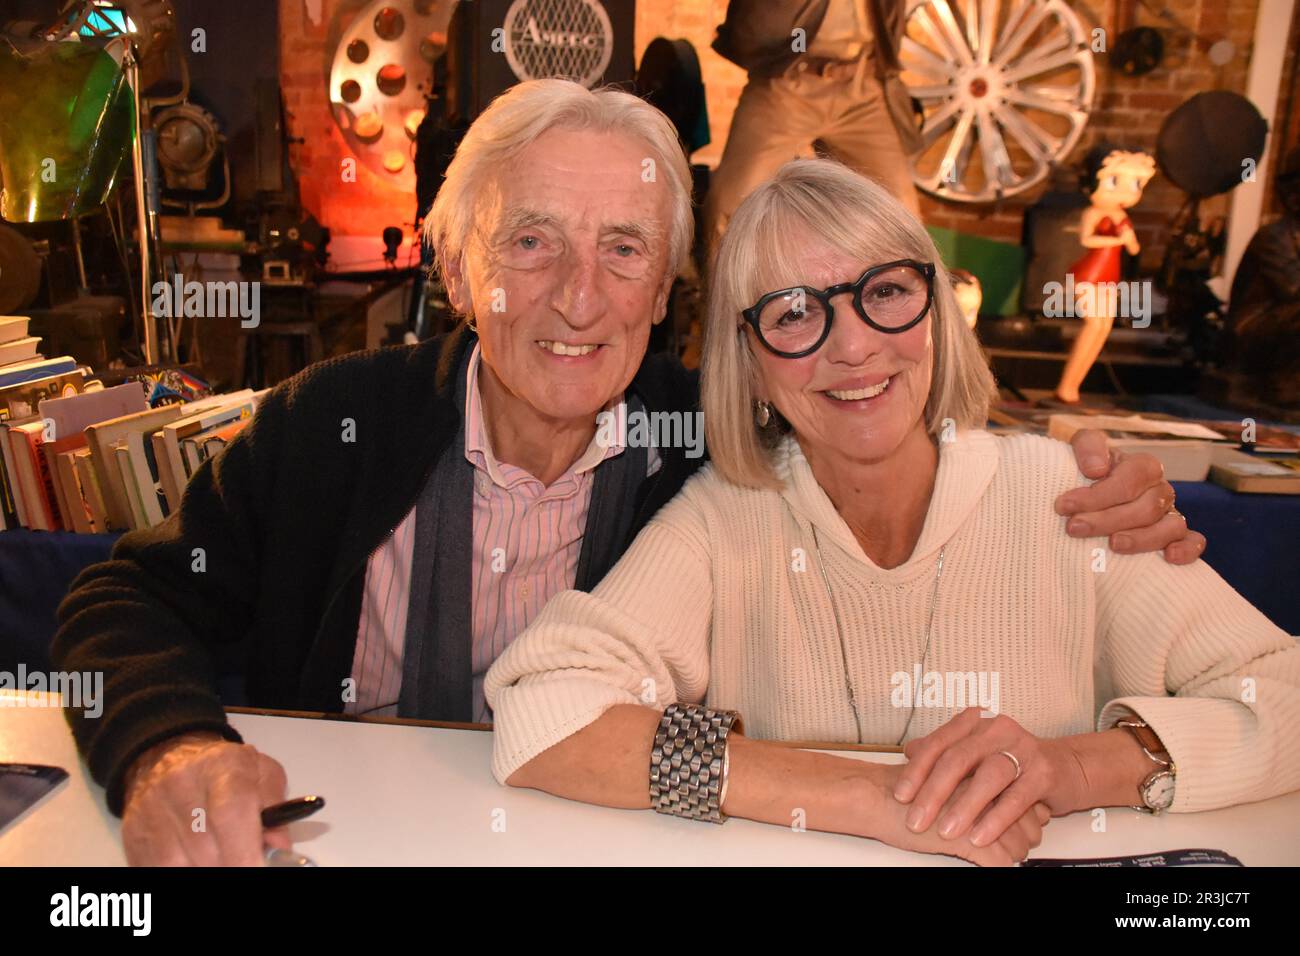 Eric Richard and Trudie Goowdin at Misty Moon Event, The Bill Reunion 7 held at The Cinema Museum, London. Saturday 12th Nov 2022. Stock Photo